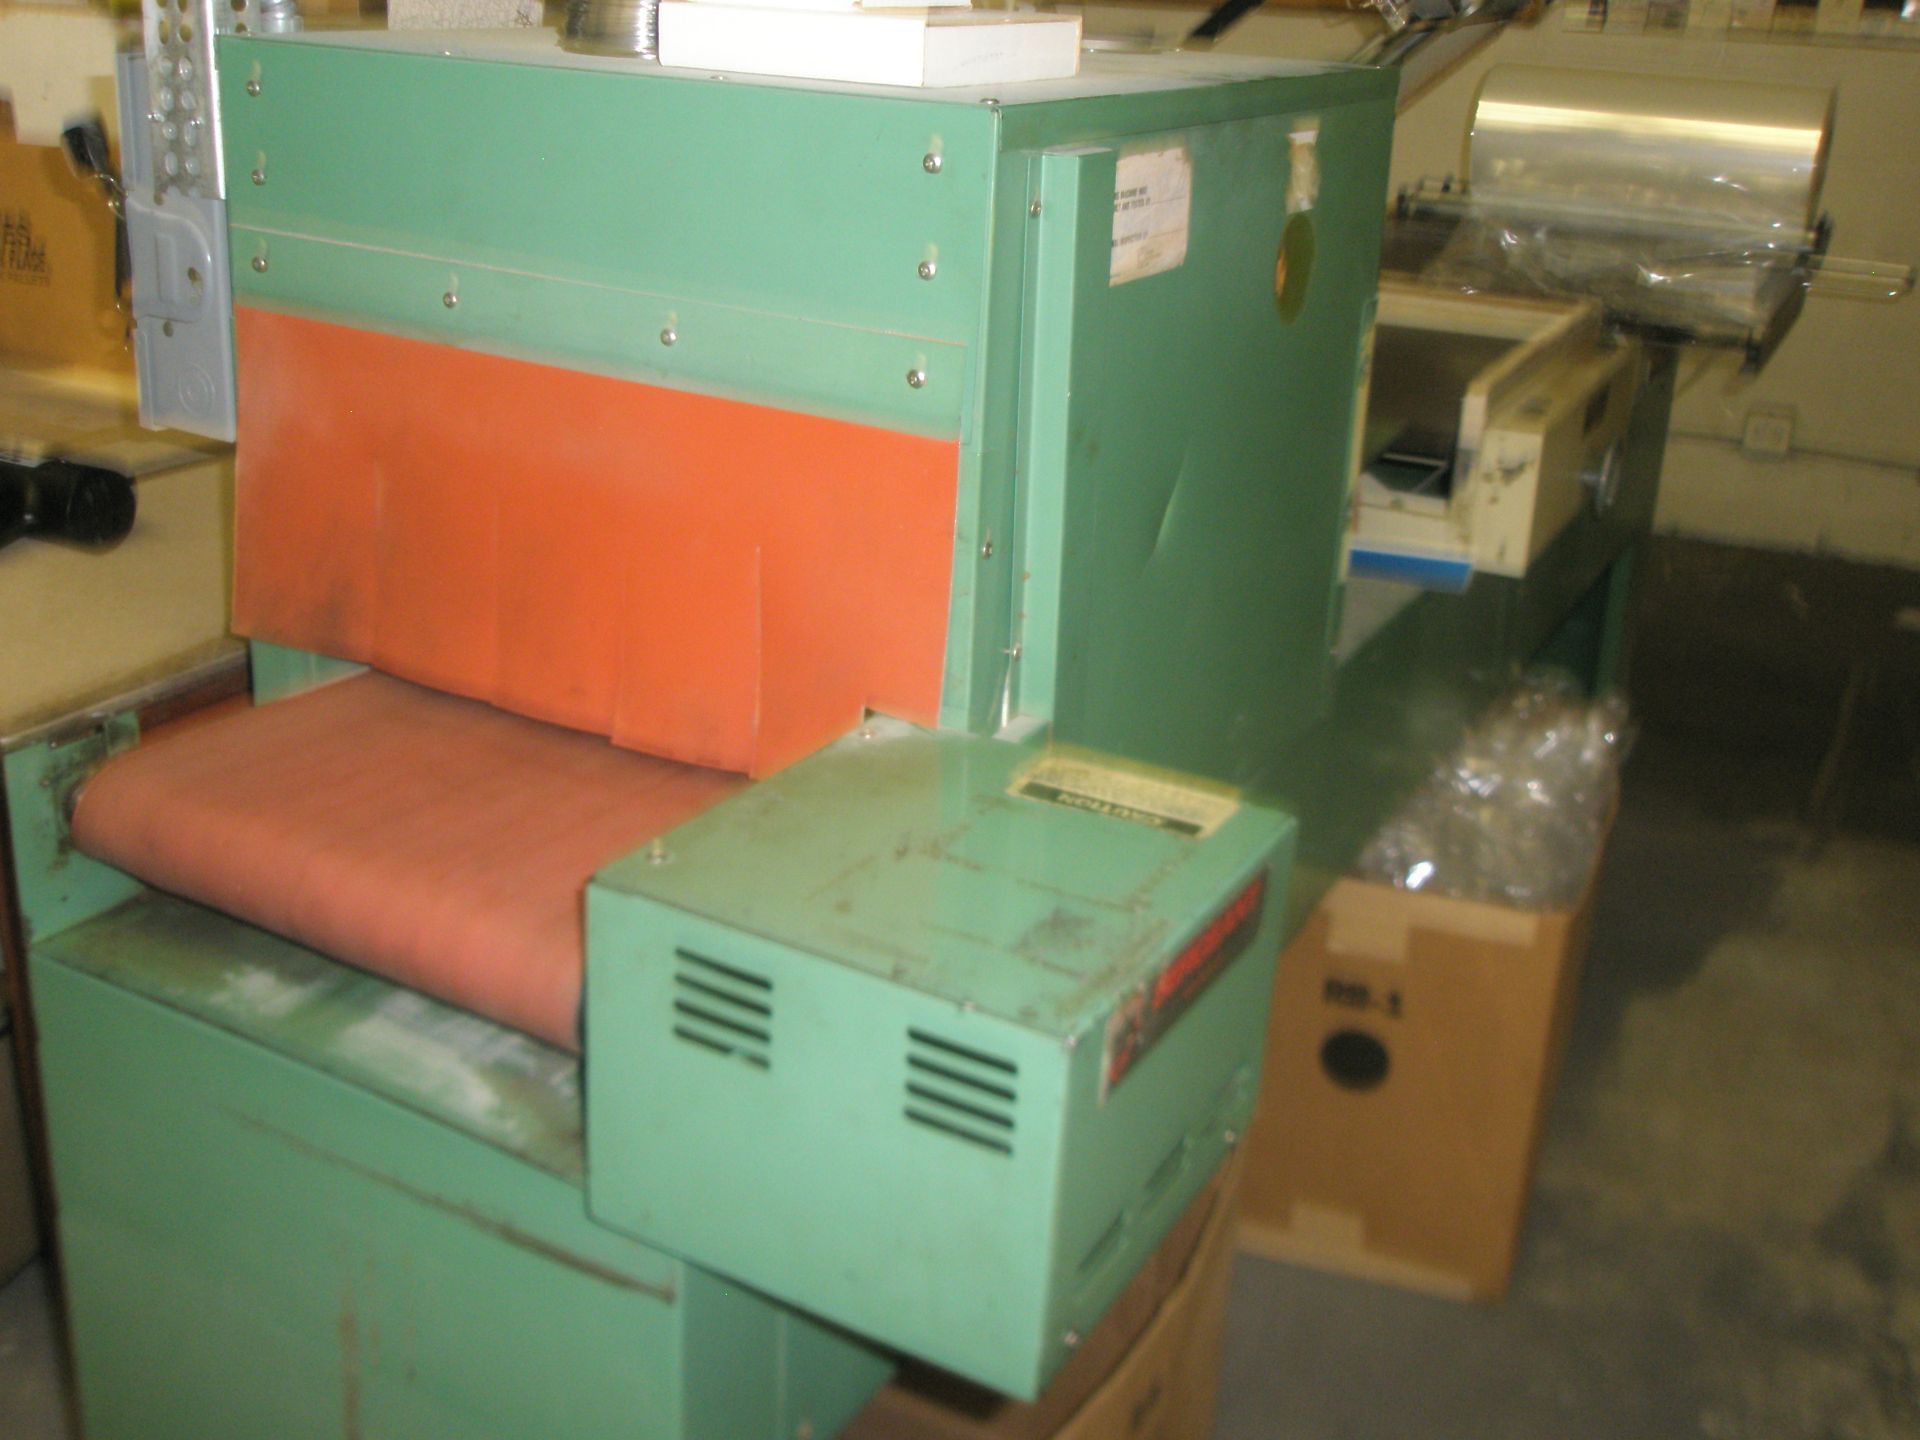 Allied Automation Flexible Packaging Machine w/Bar Sealer and Shrink Tunnel - Image 2 of 3